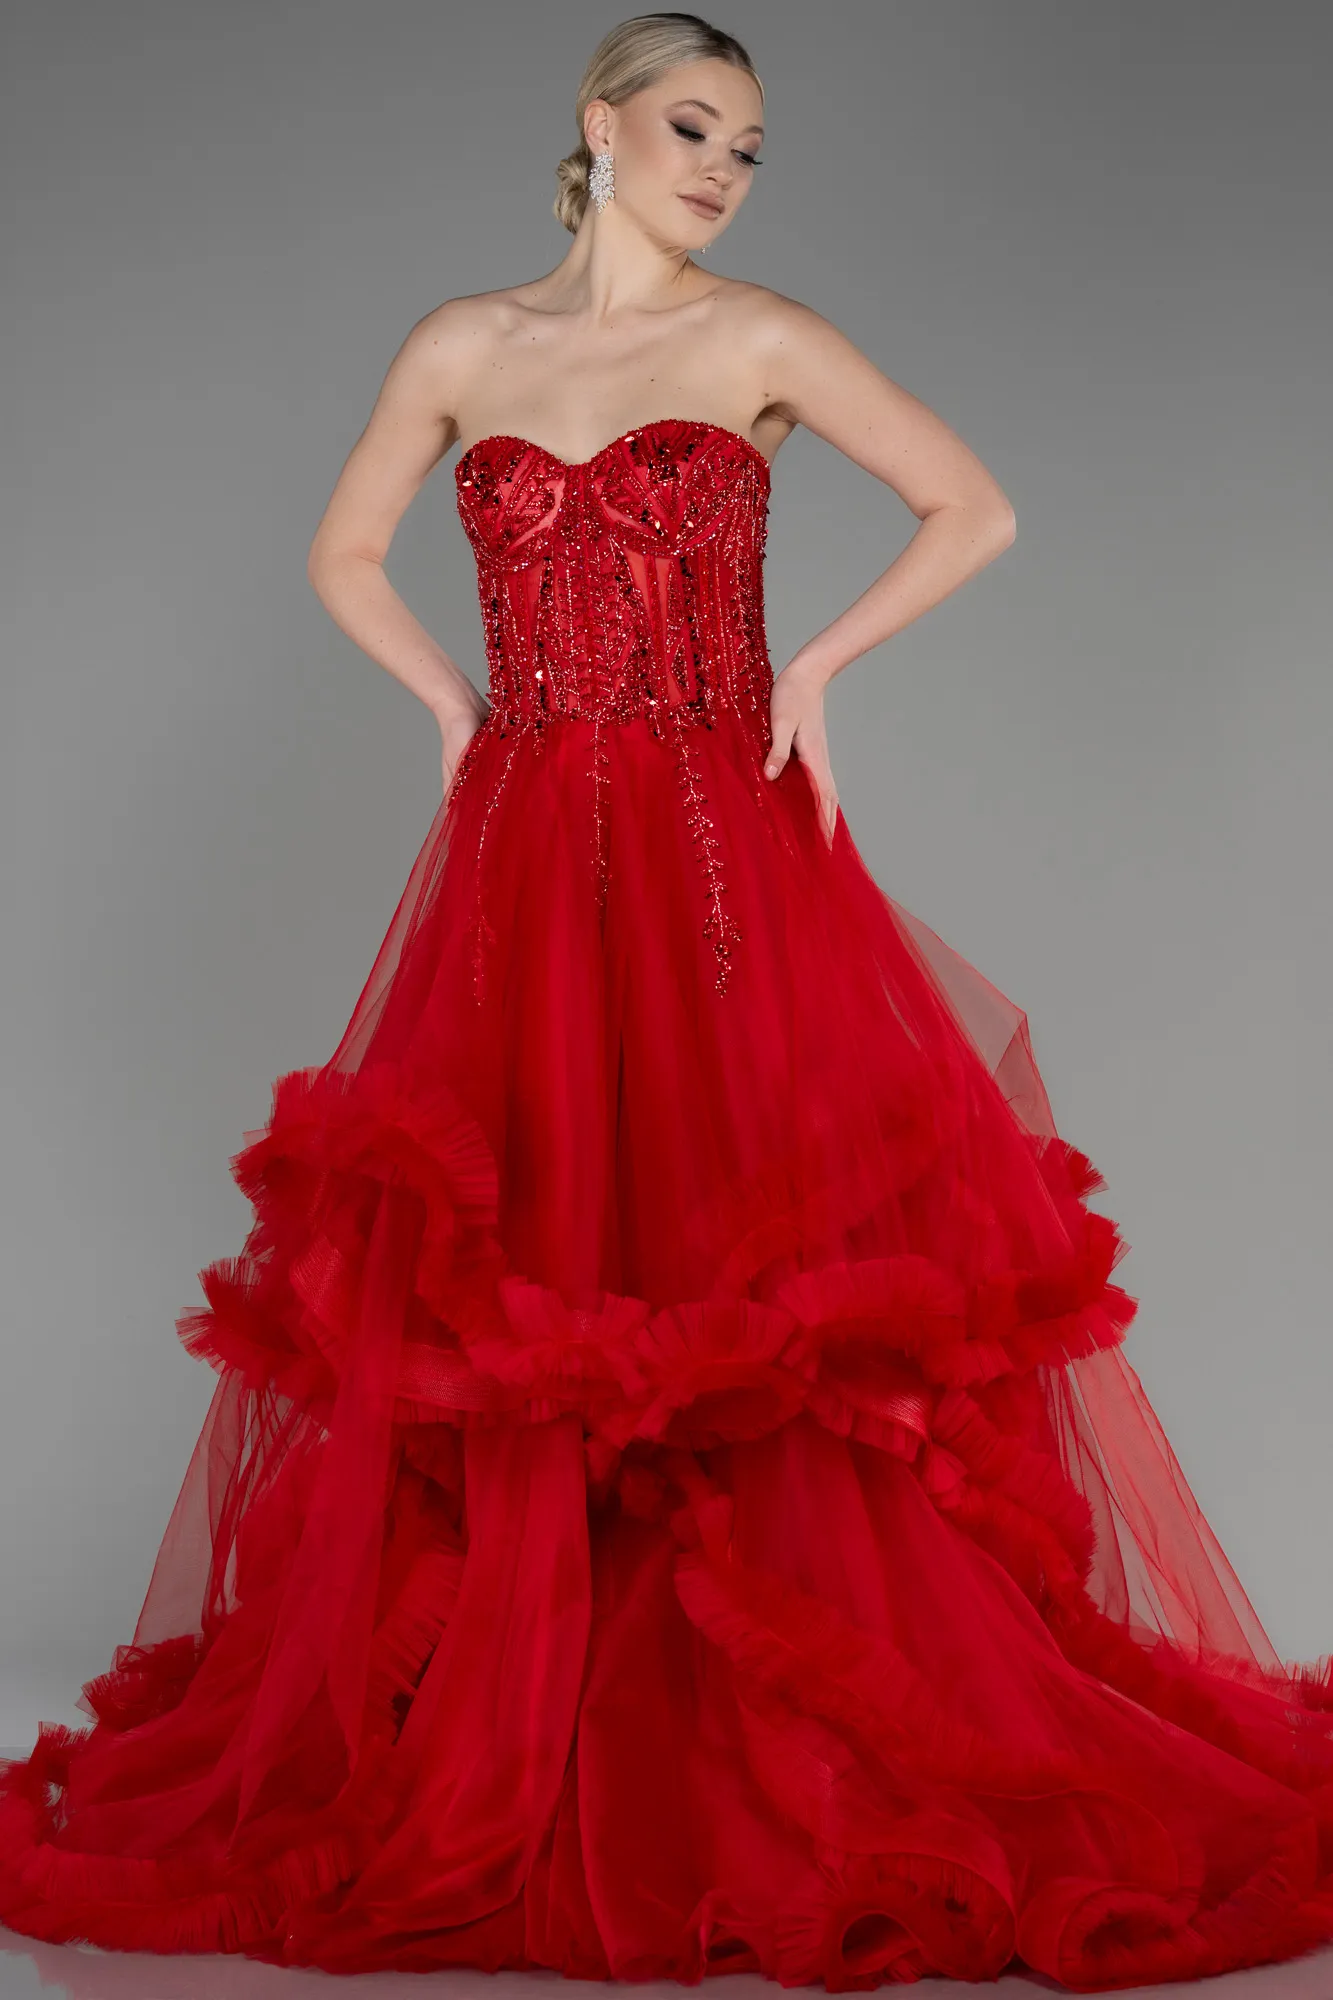 Red-Long Haute Couture Dress ABU3665